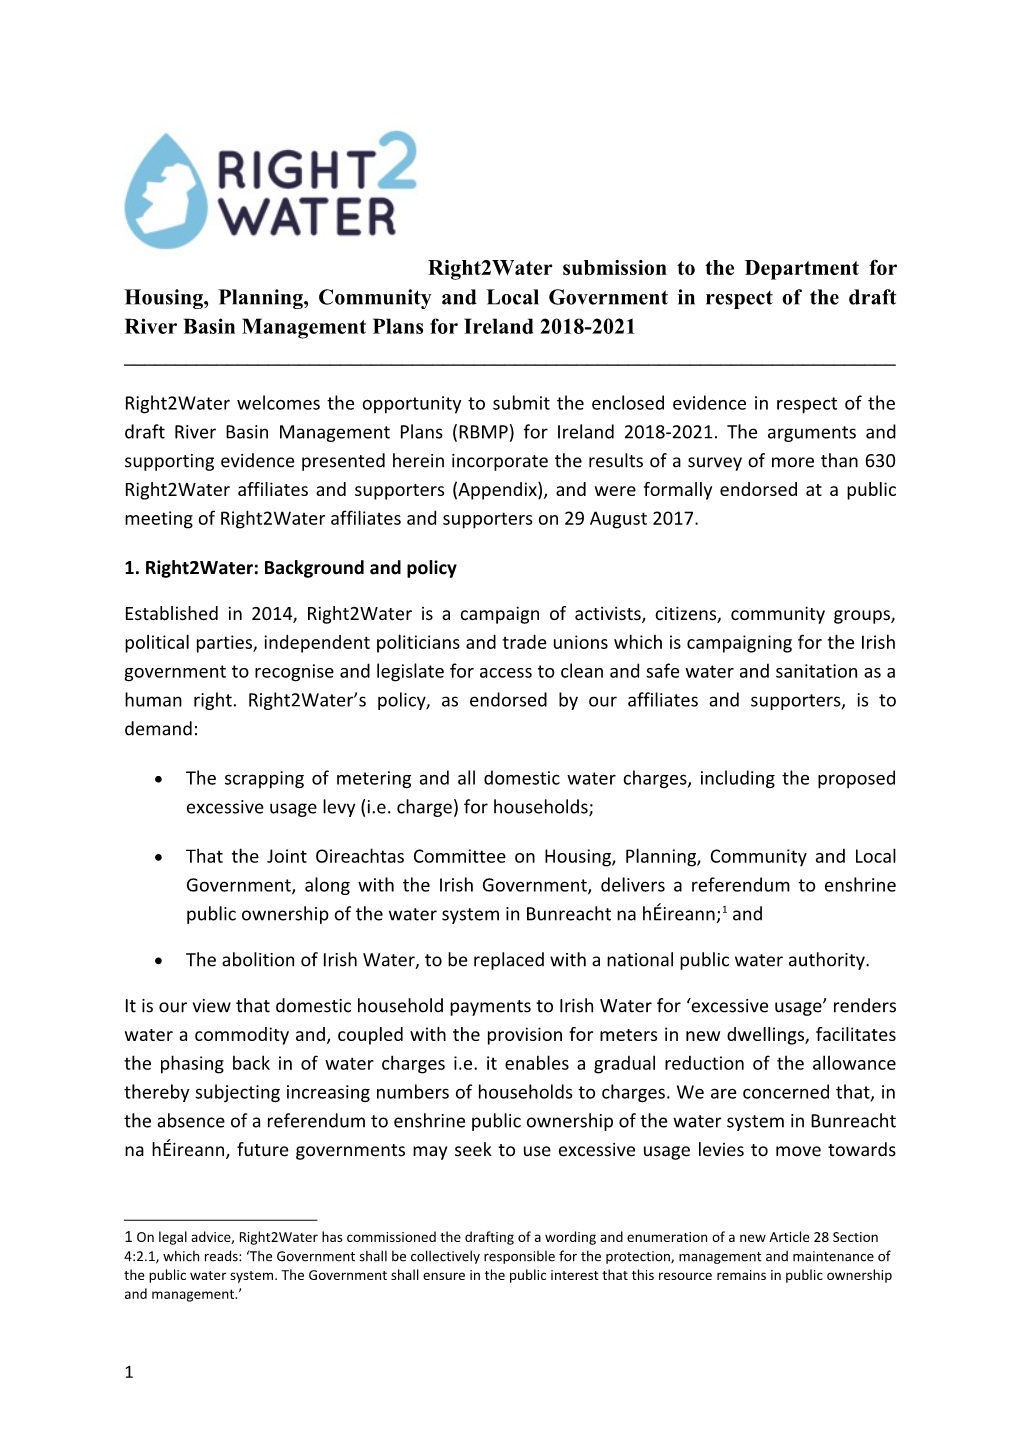 1. Right2water: Background and Policy